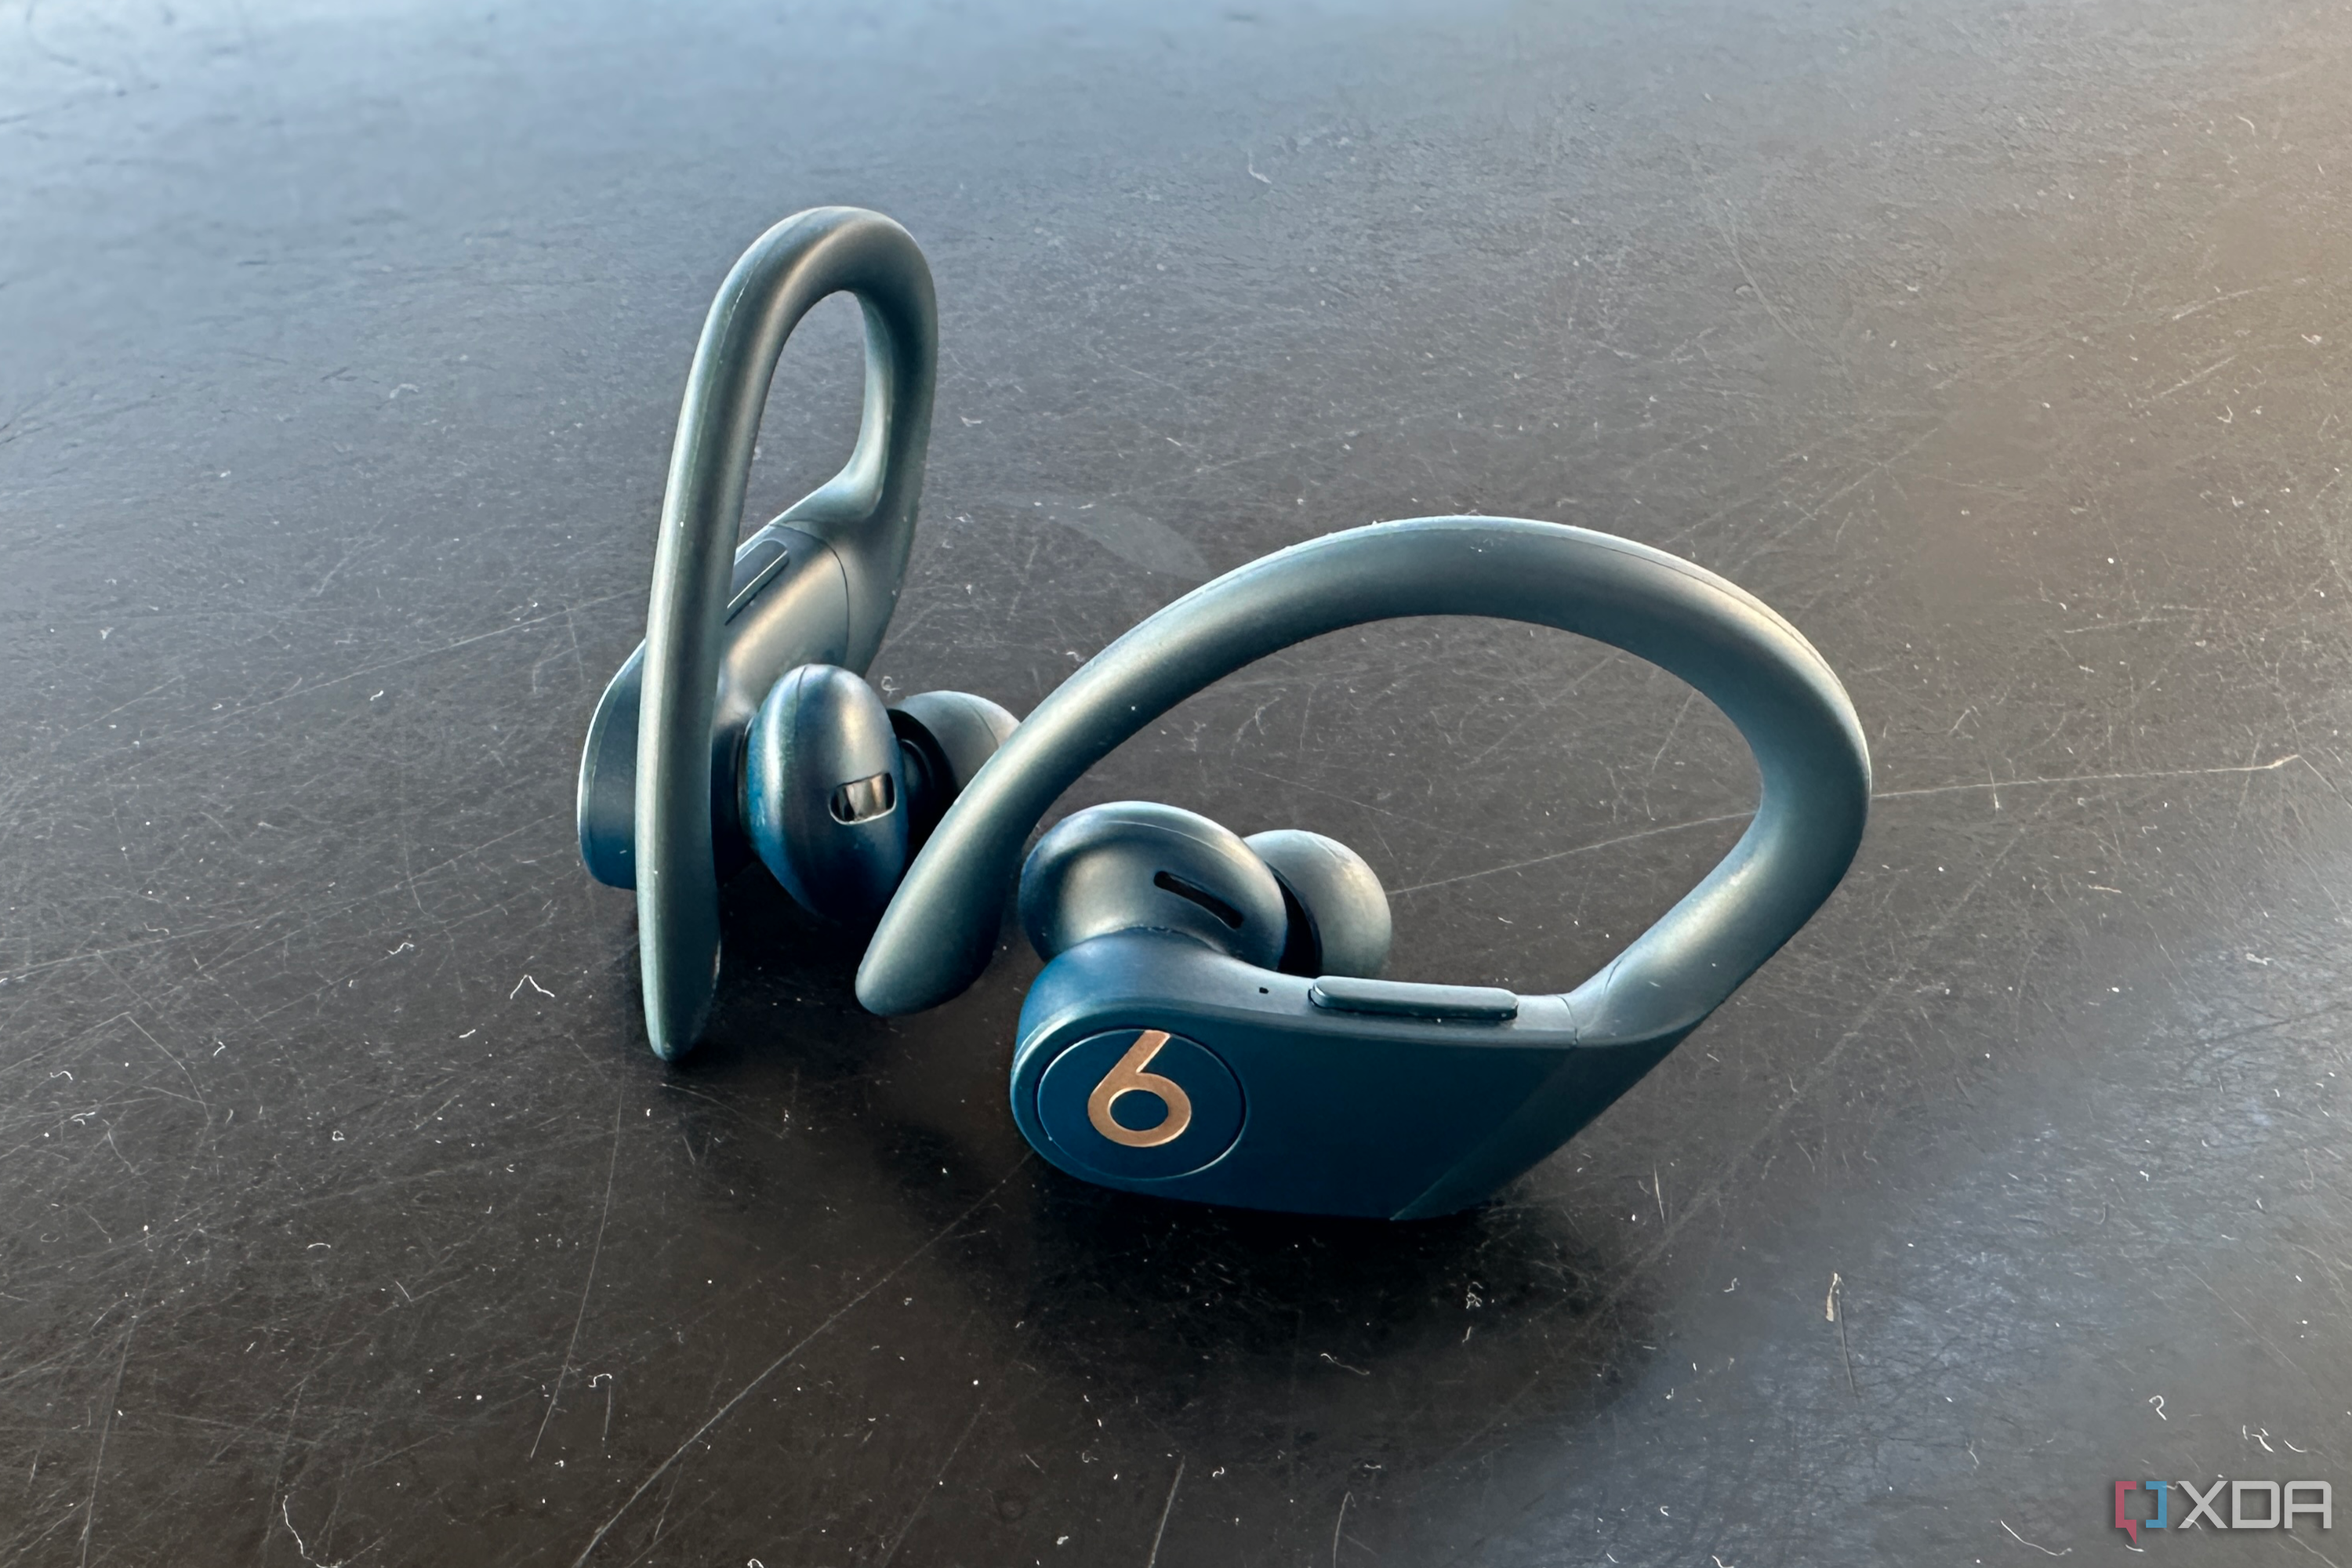 Two Powerbeats Pro earbuds resting on a table.